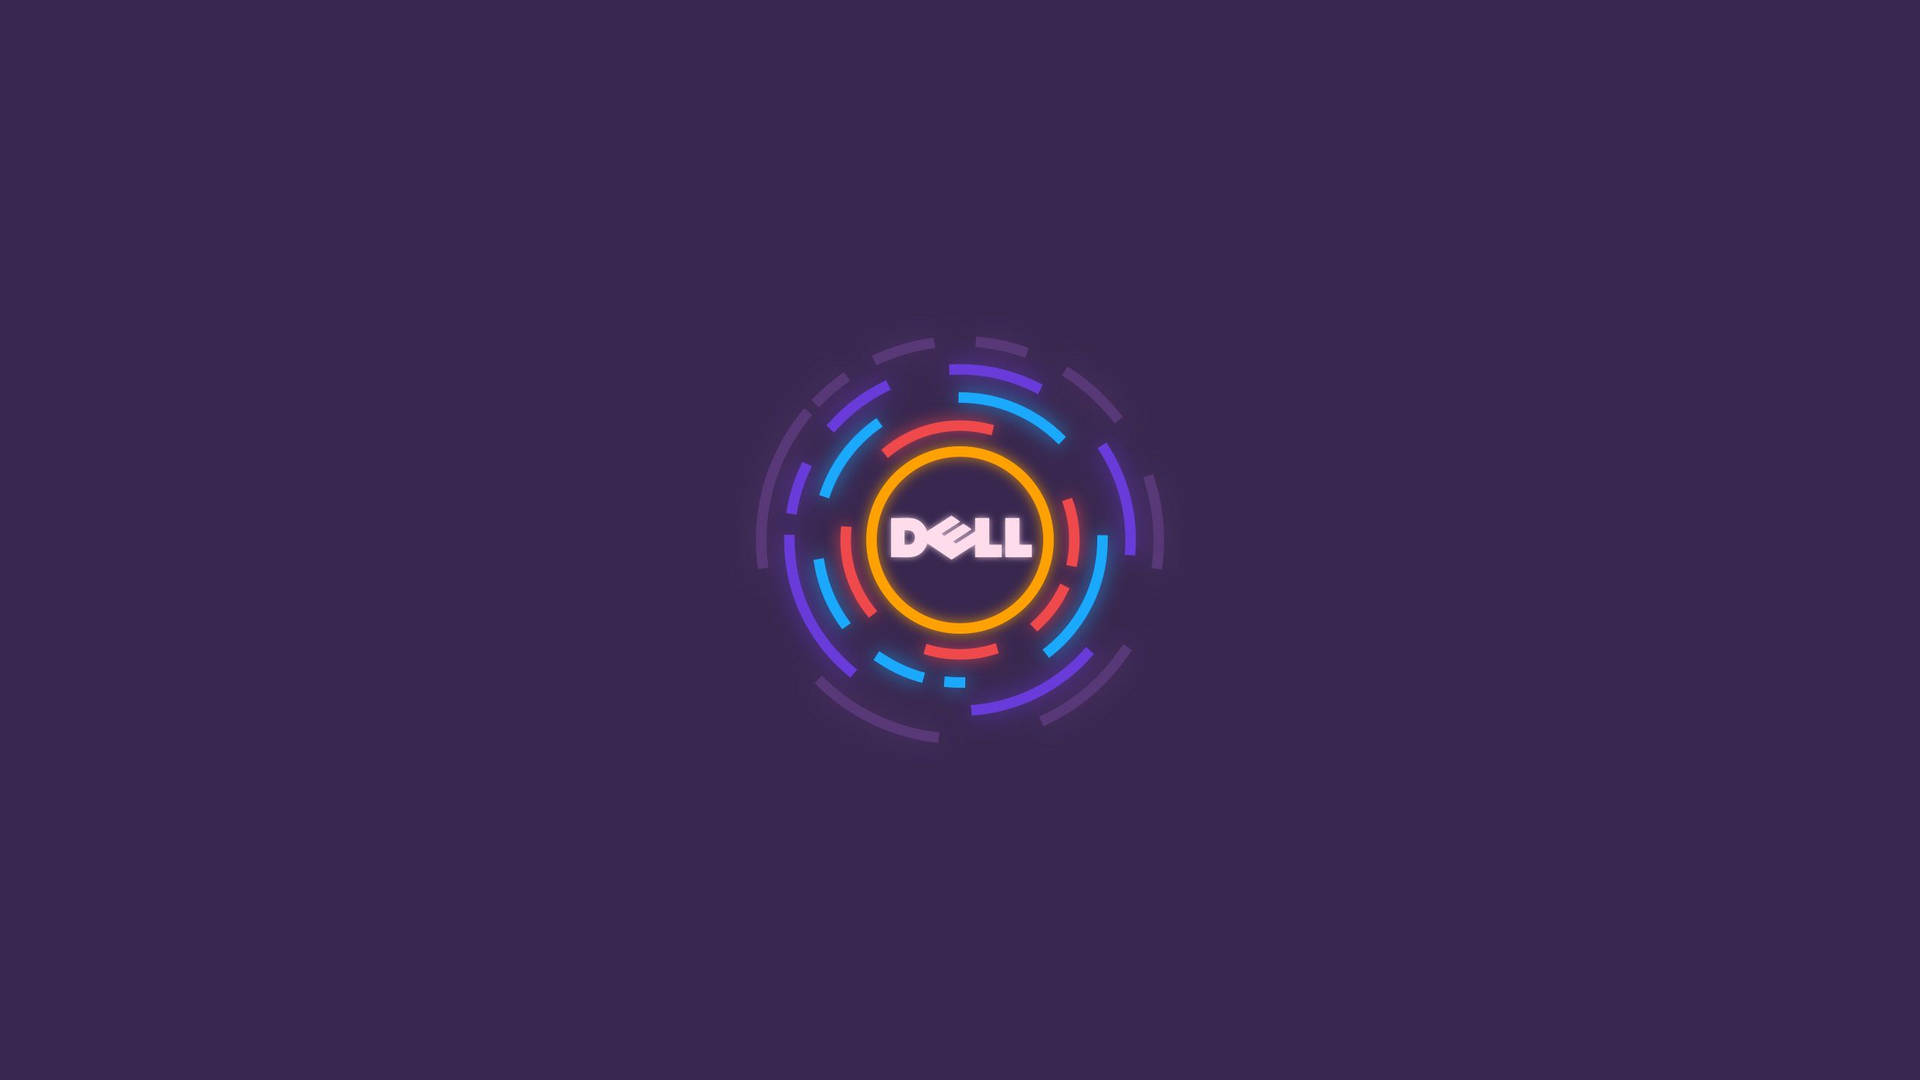 Dell 2560X1440 Wallpaper and Background Image